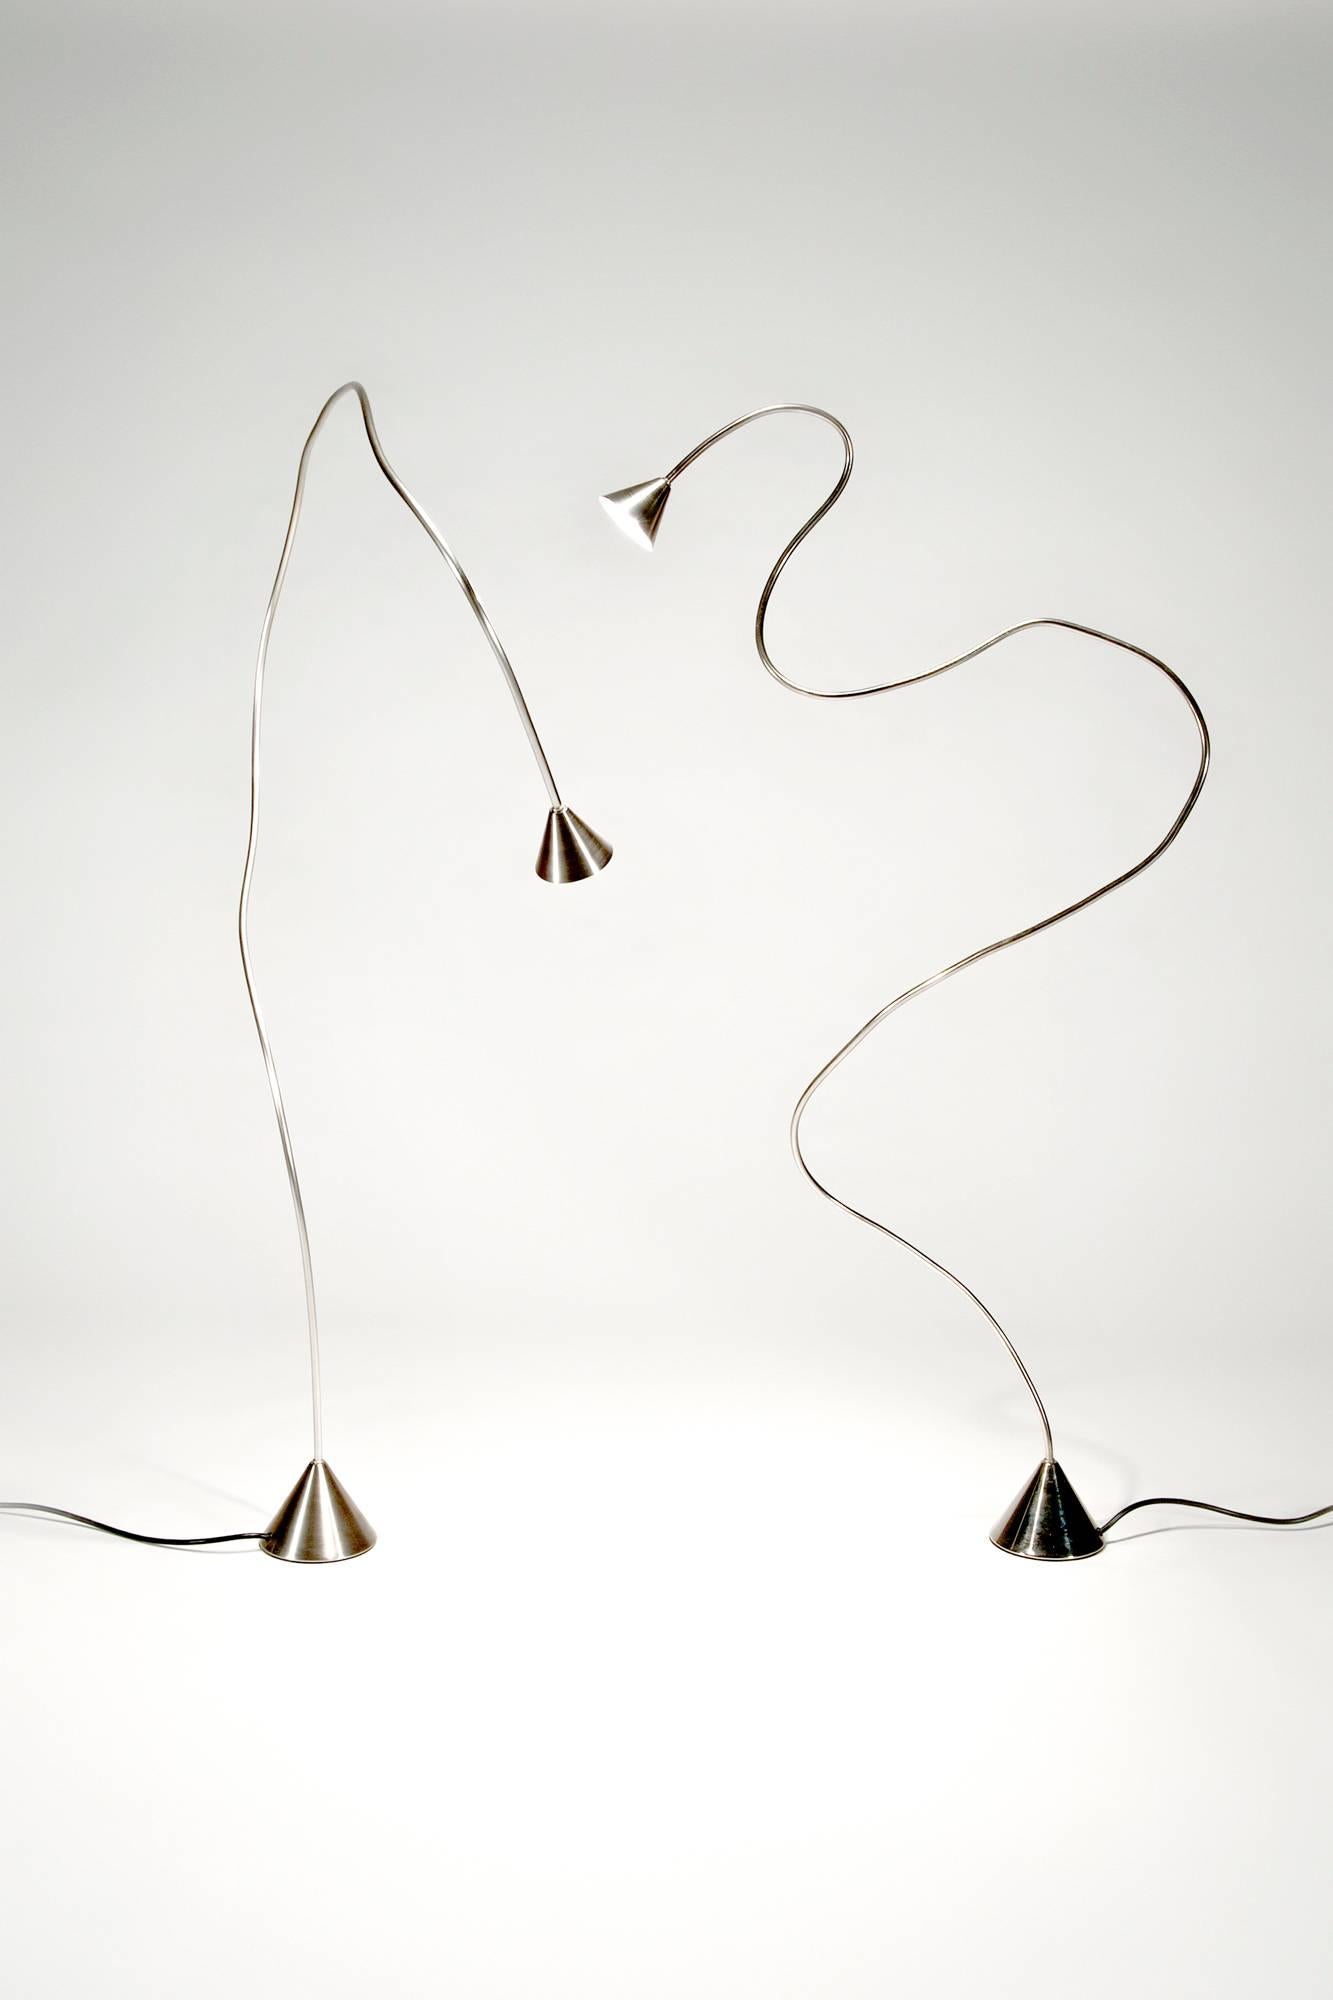 Two lamps included. Each can be bent and shaped into a variety of configurations. Each lamp requires 1 x 75 watt 12V 6 x 6.35 base bi-pin halogen bulb. UL Listed. From 2010 production, in good condition, wear consistent with age and use.

?A